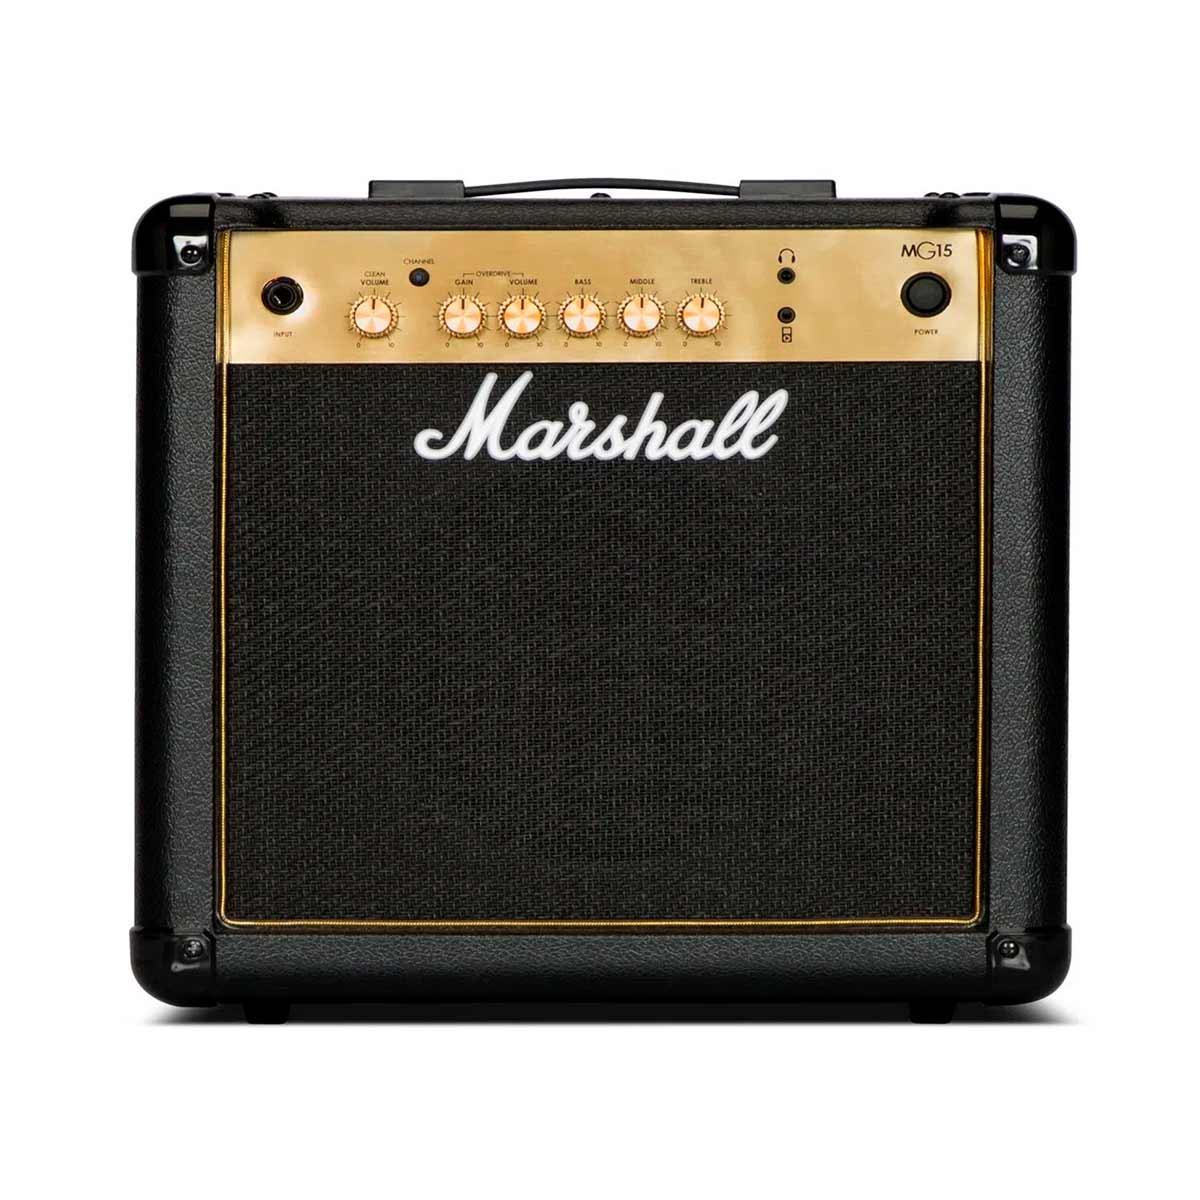 Amplificador Guitarra Eléctrica Marshall Gold Mg15g 15w - Style Store